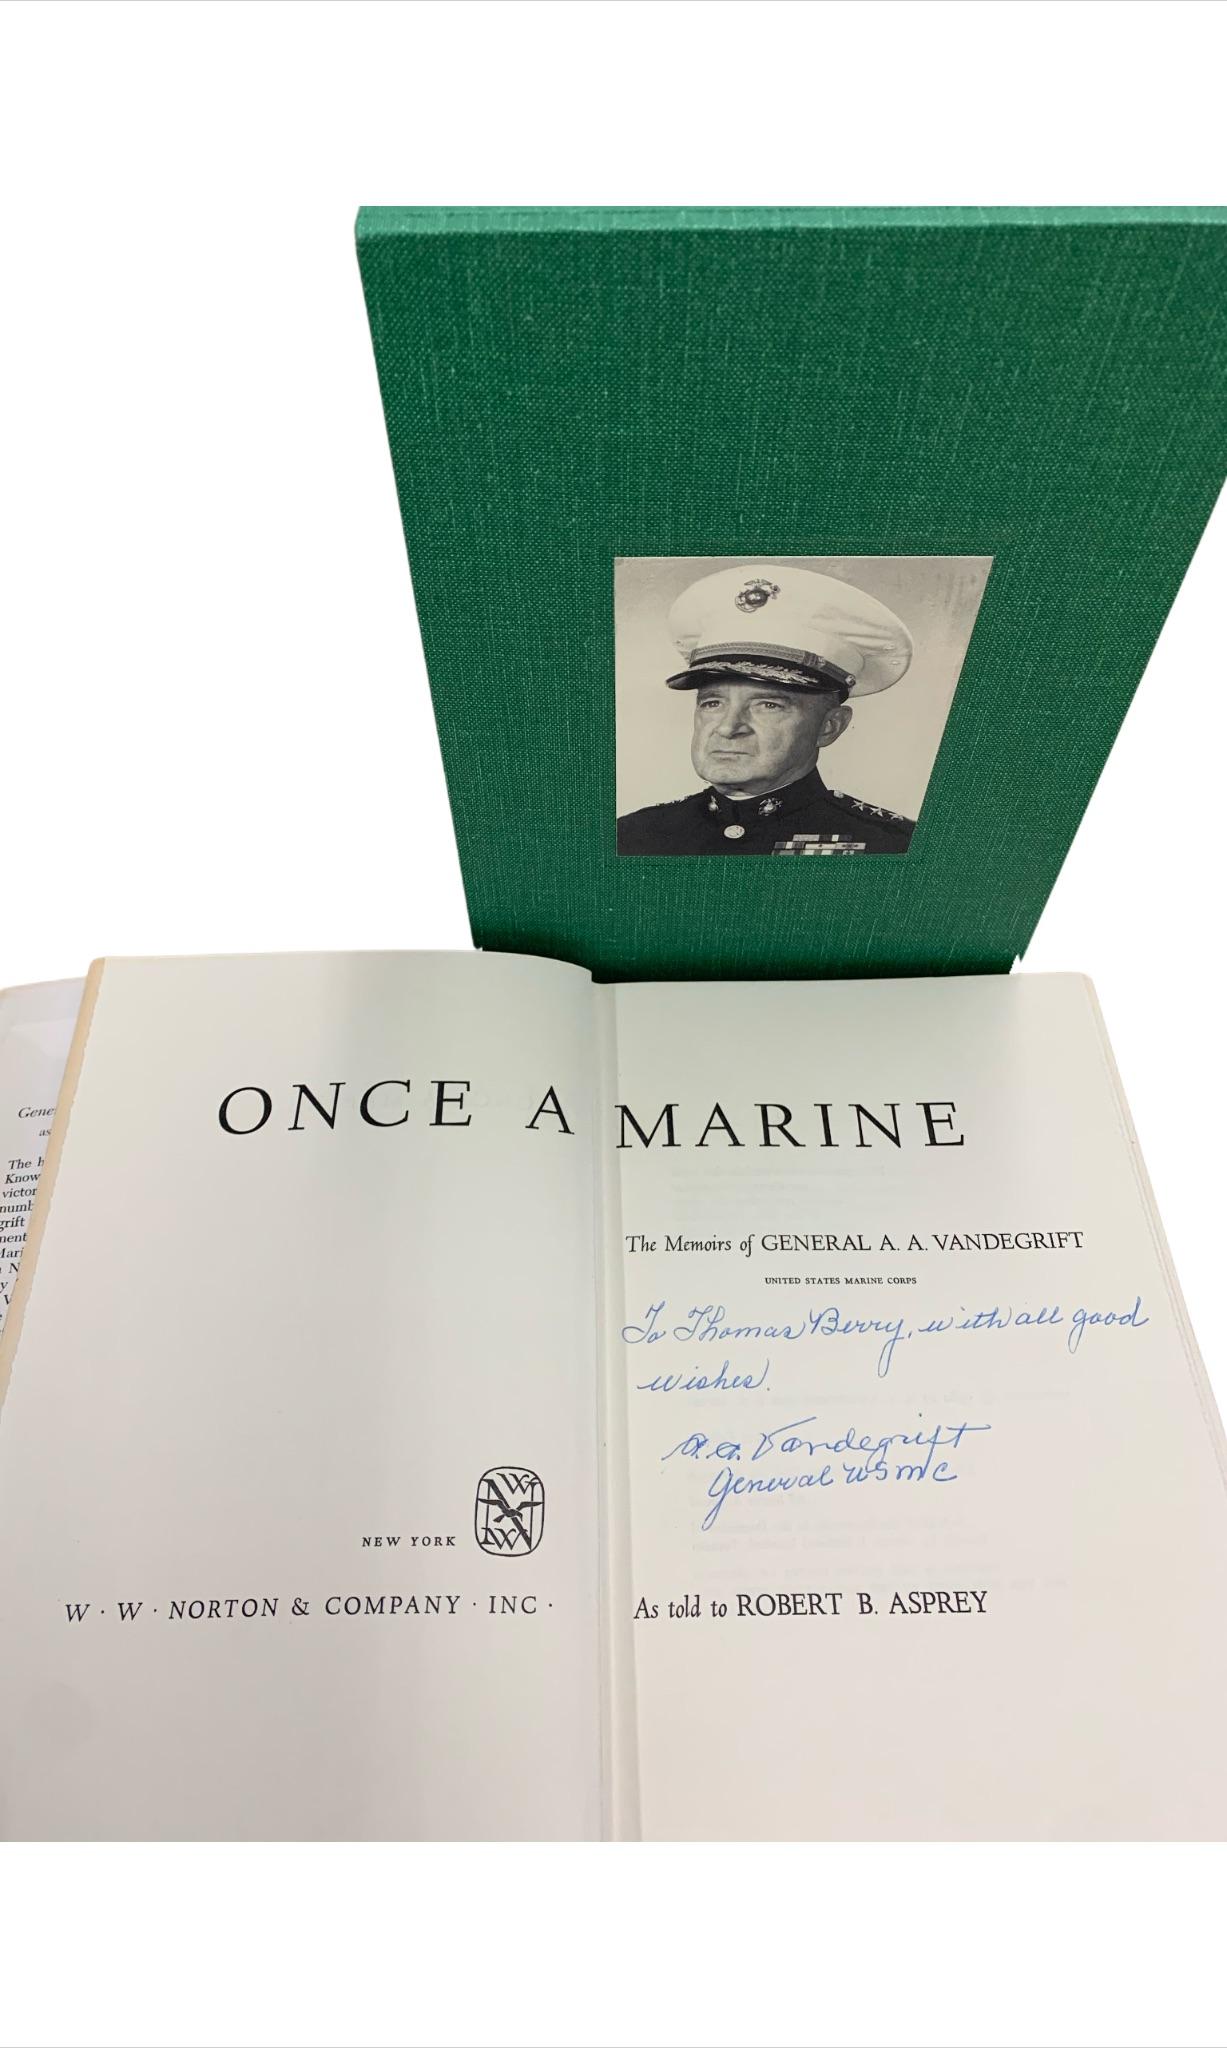 Vandegrift, A.A., Asprey, R.B., Once a Marine, The Memoirs of General A.A. Vandegrift. New York: W.W. Norton & Company Inc., 1964. Stated first edition, signed and inscribed. Original dust jacket and custom slipcase.

Offered is a signed and